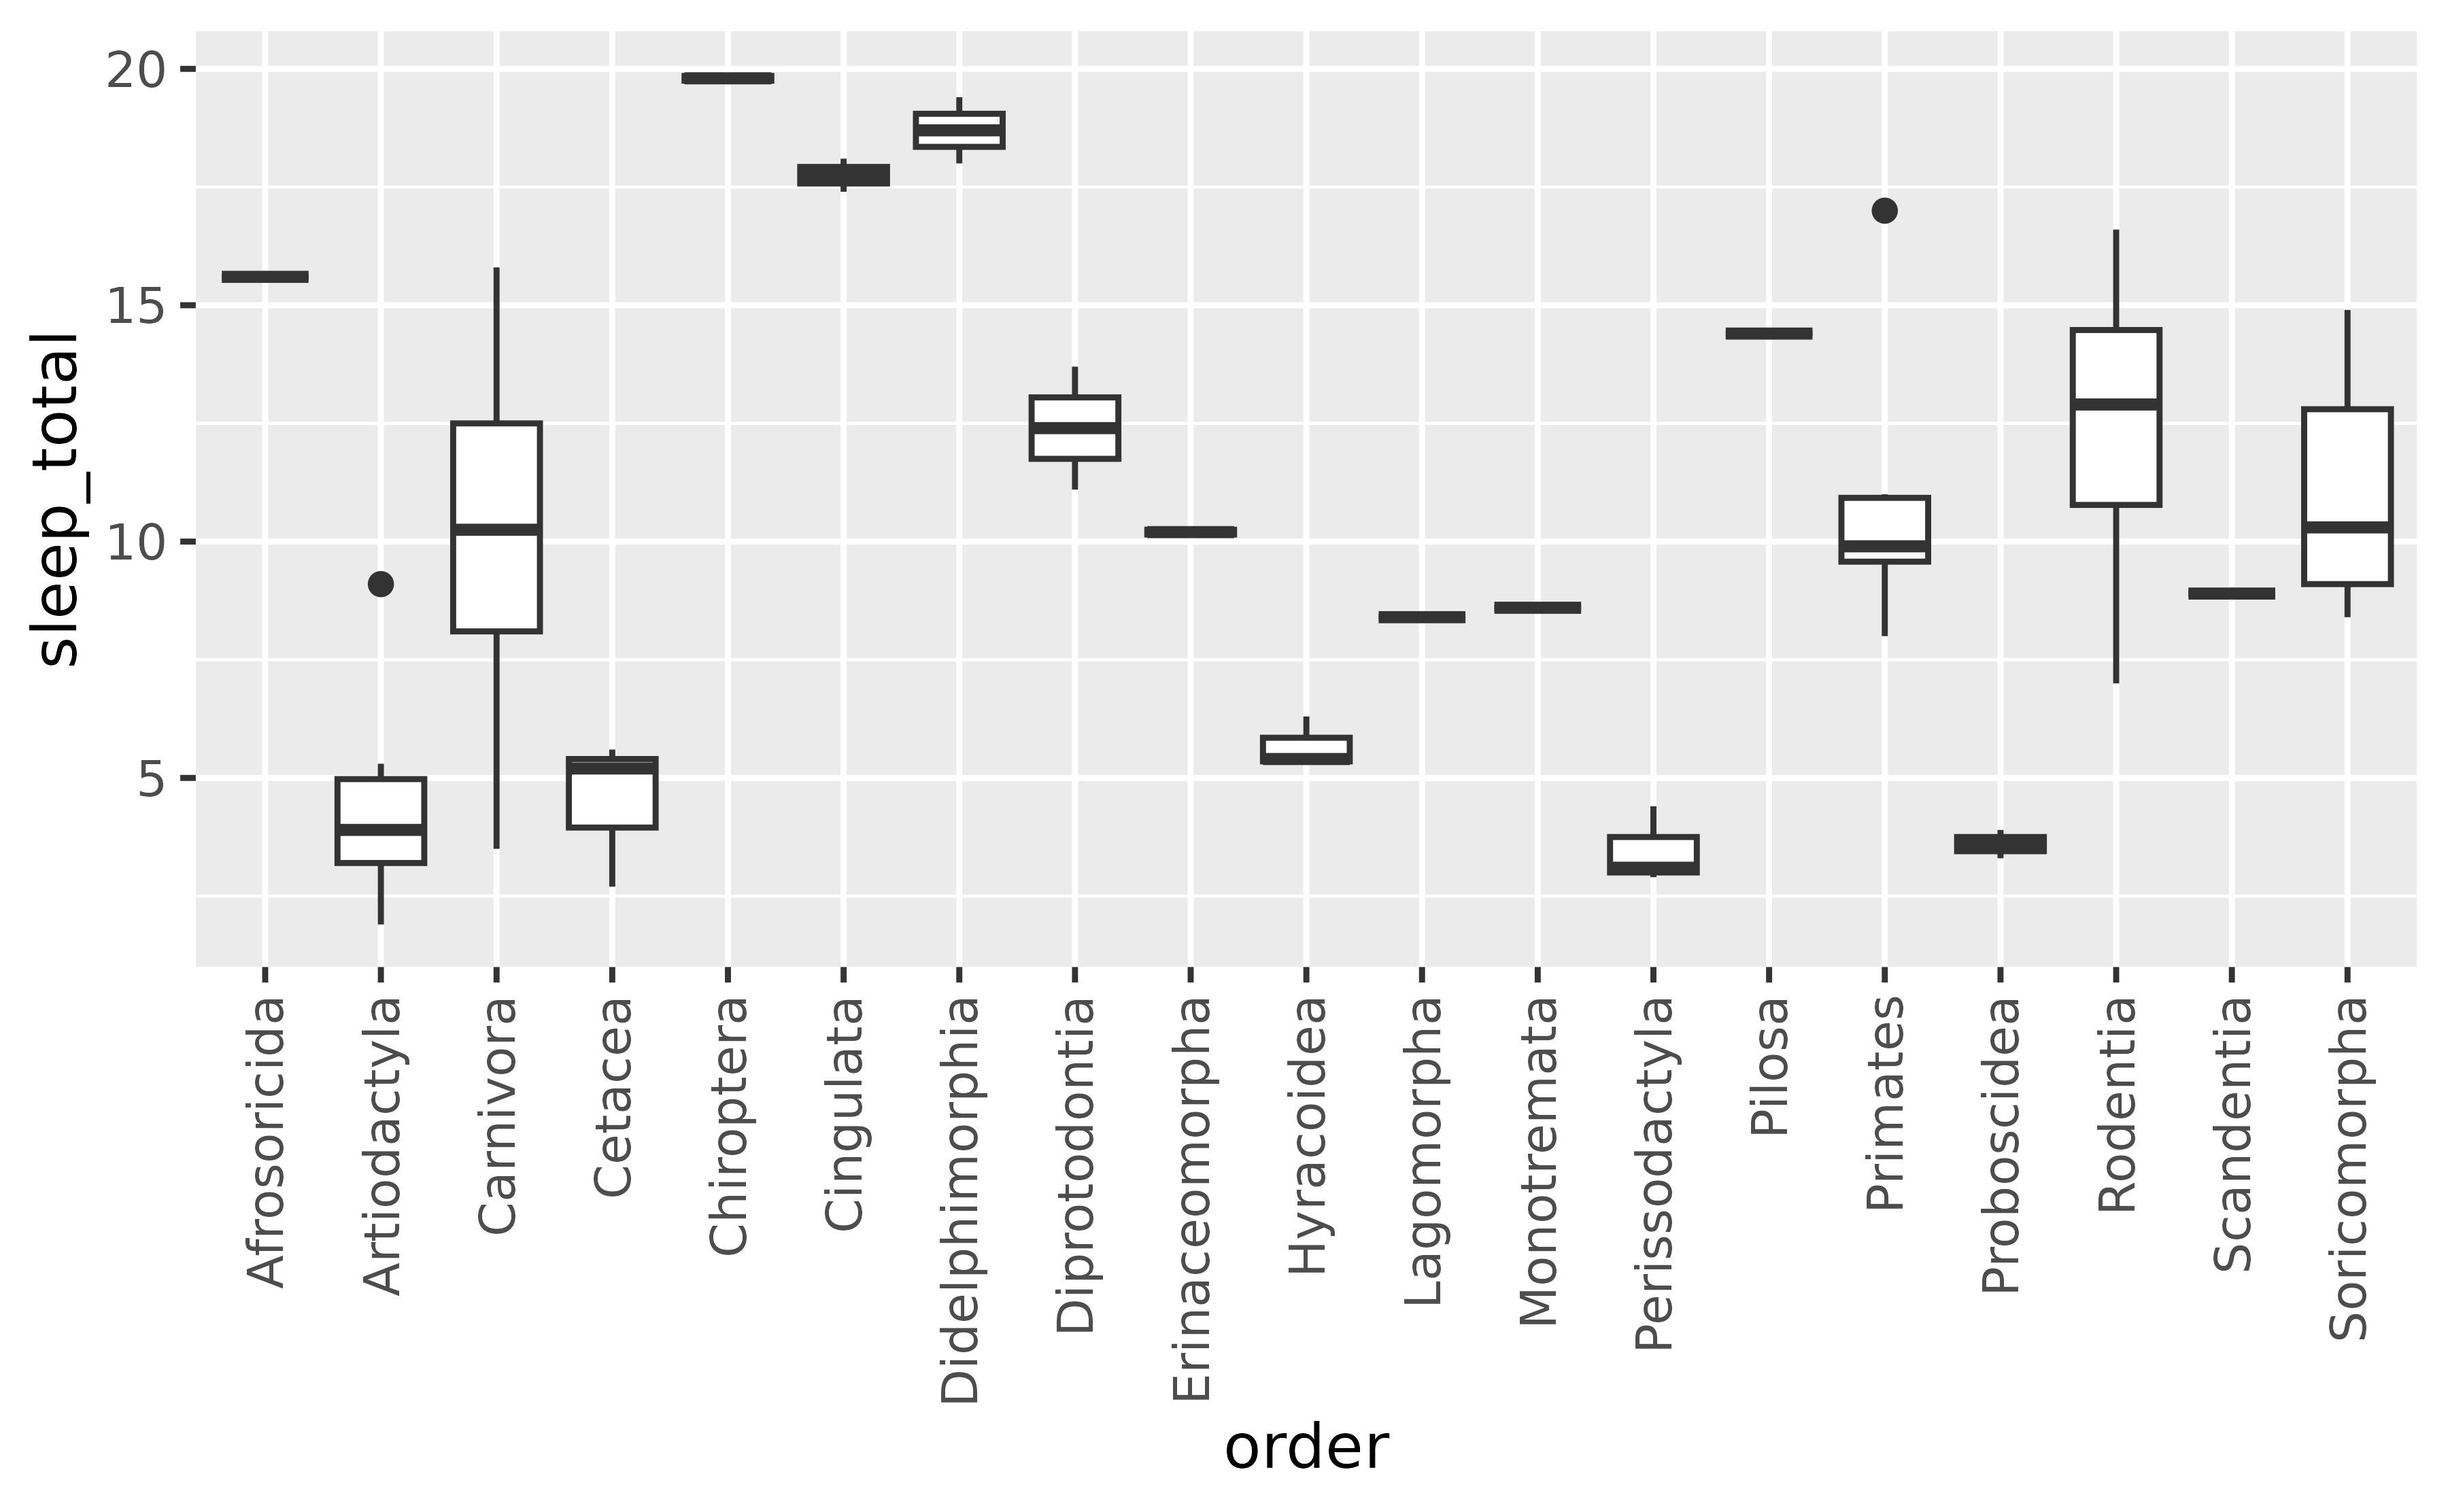 A boxplot showing the total amount of sleep on the y-axis for 19 taxonomical orders of mammals on the x-axis. The x-axis labels are oriented vertically and are readable.